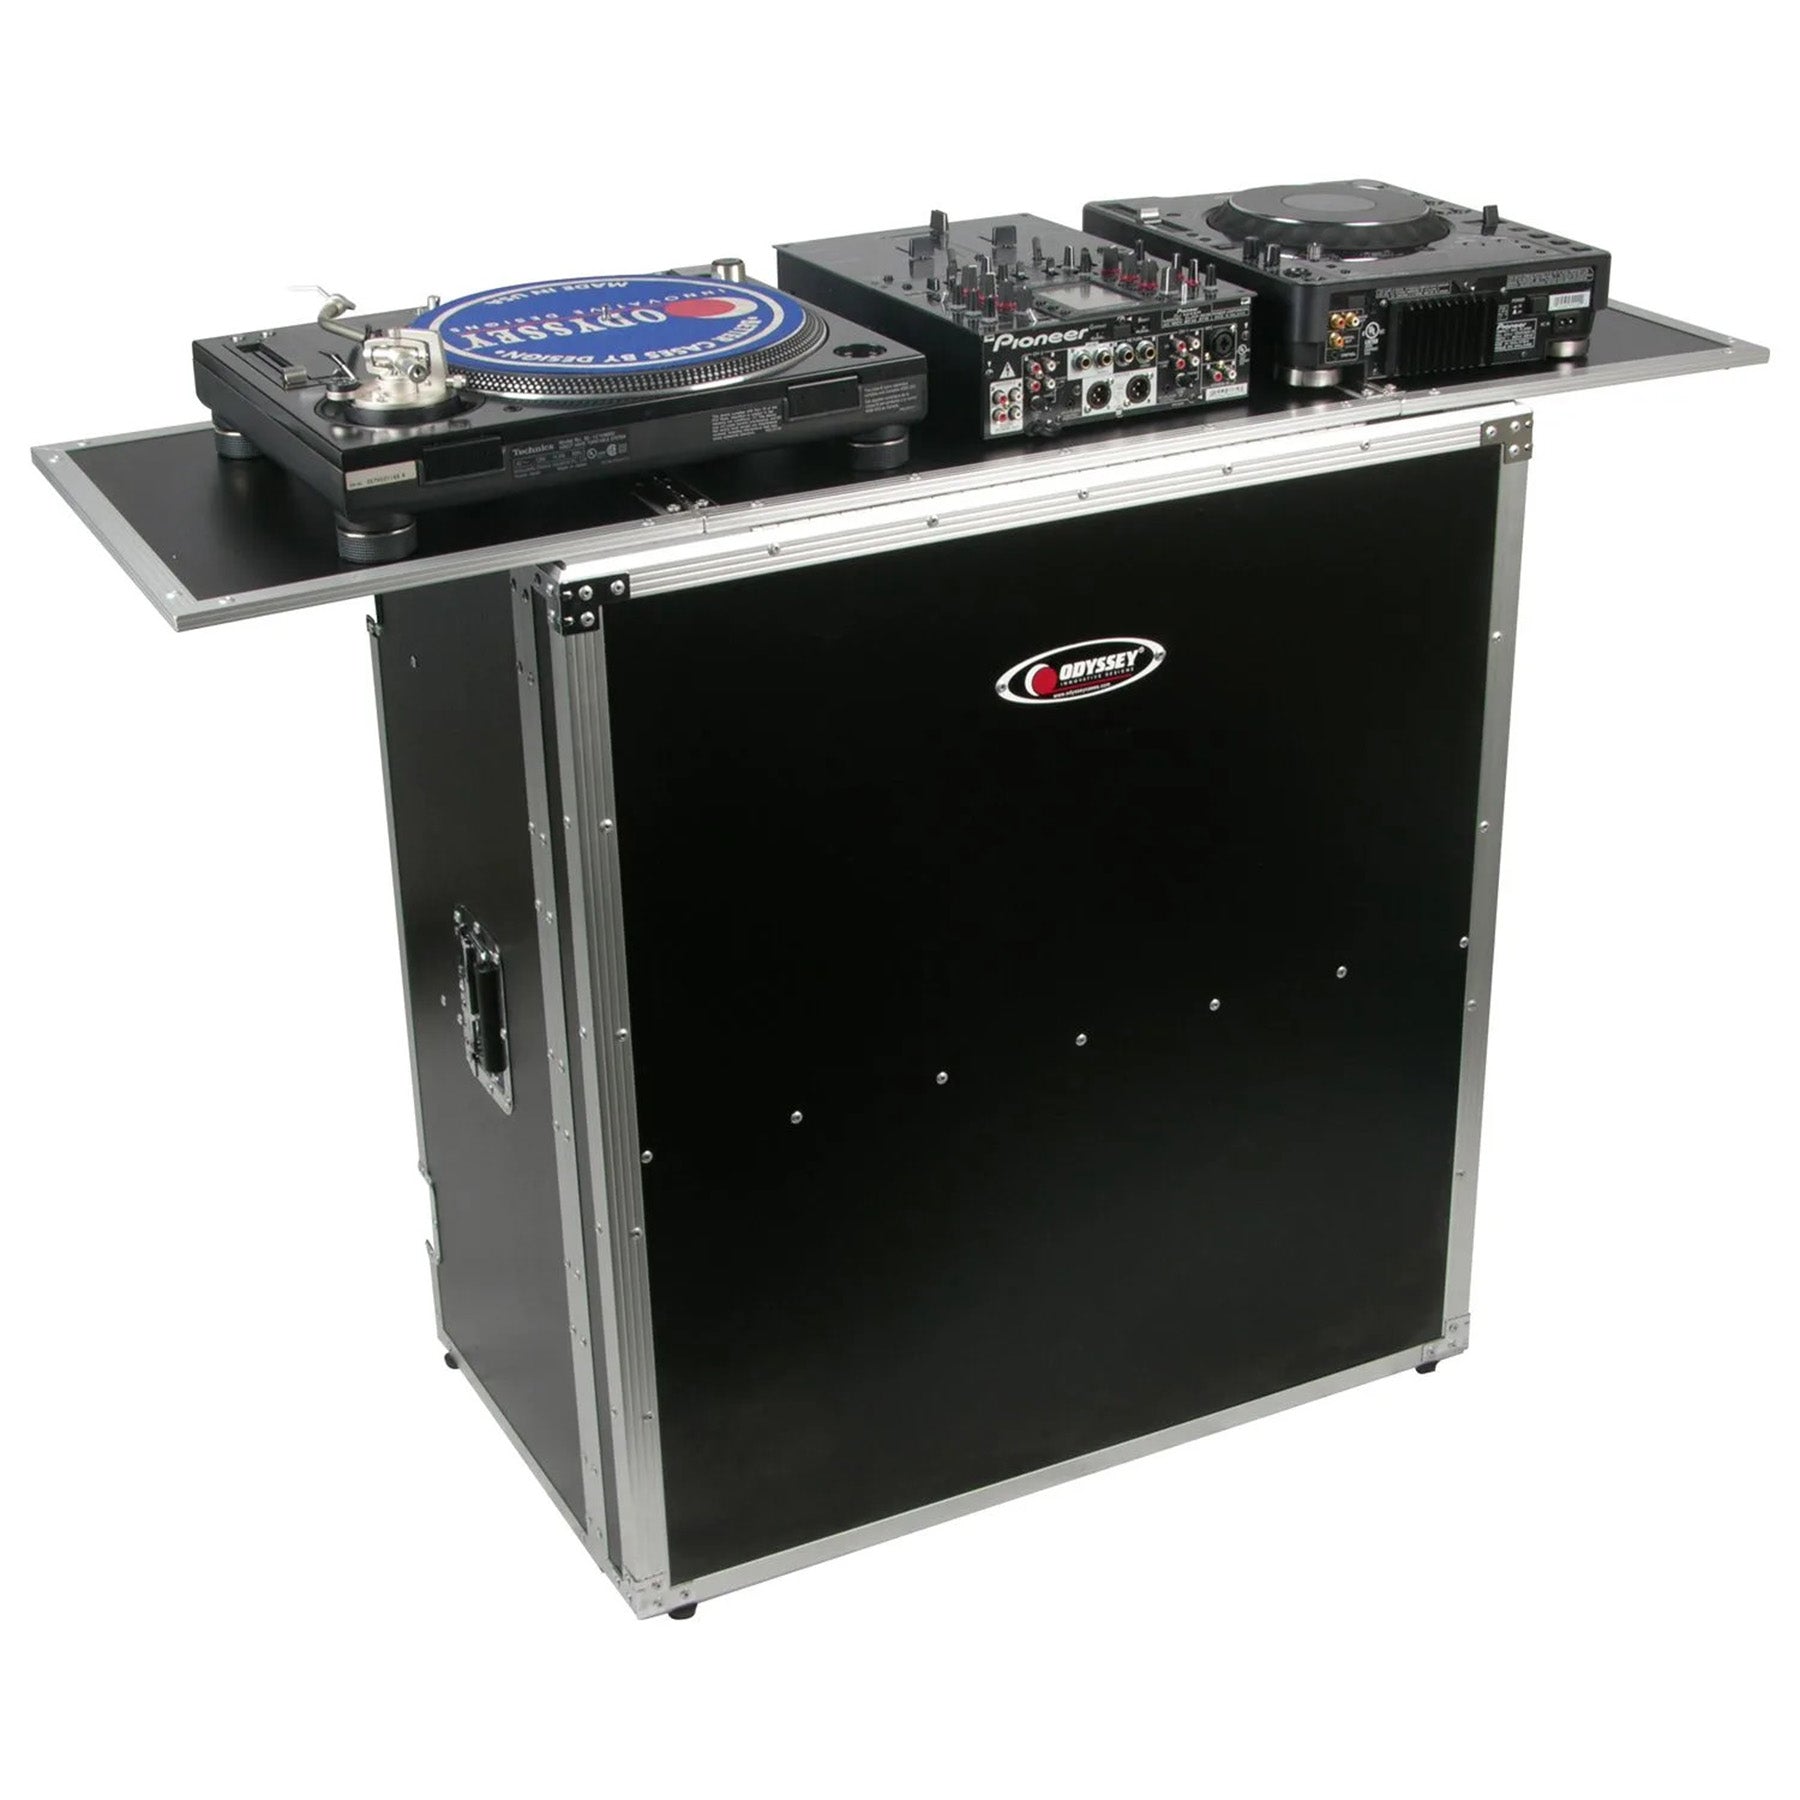 Odyssey FZF5437T DJ Fold-Out Table Stand with Interior Support Shelf 54 x 37 | Open Box - Hollywood DJ